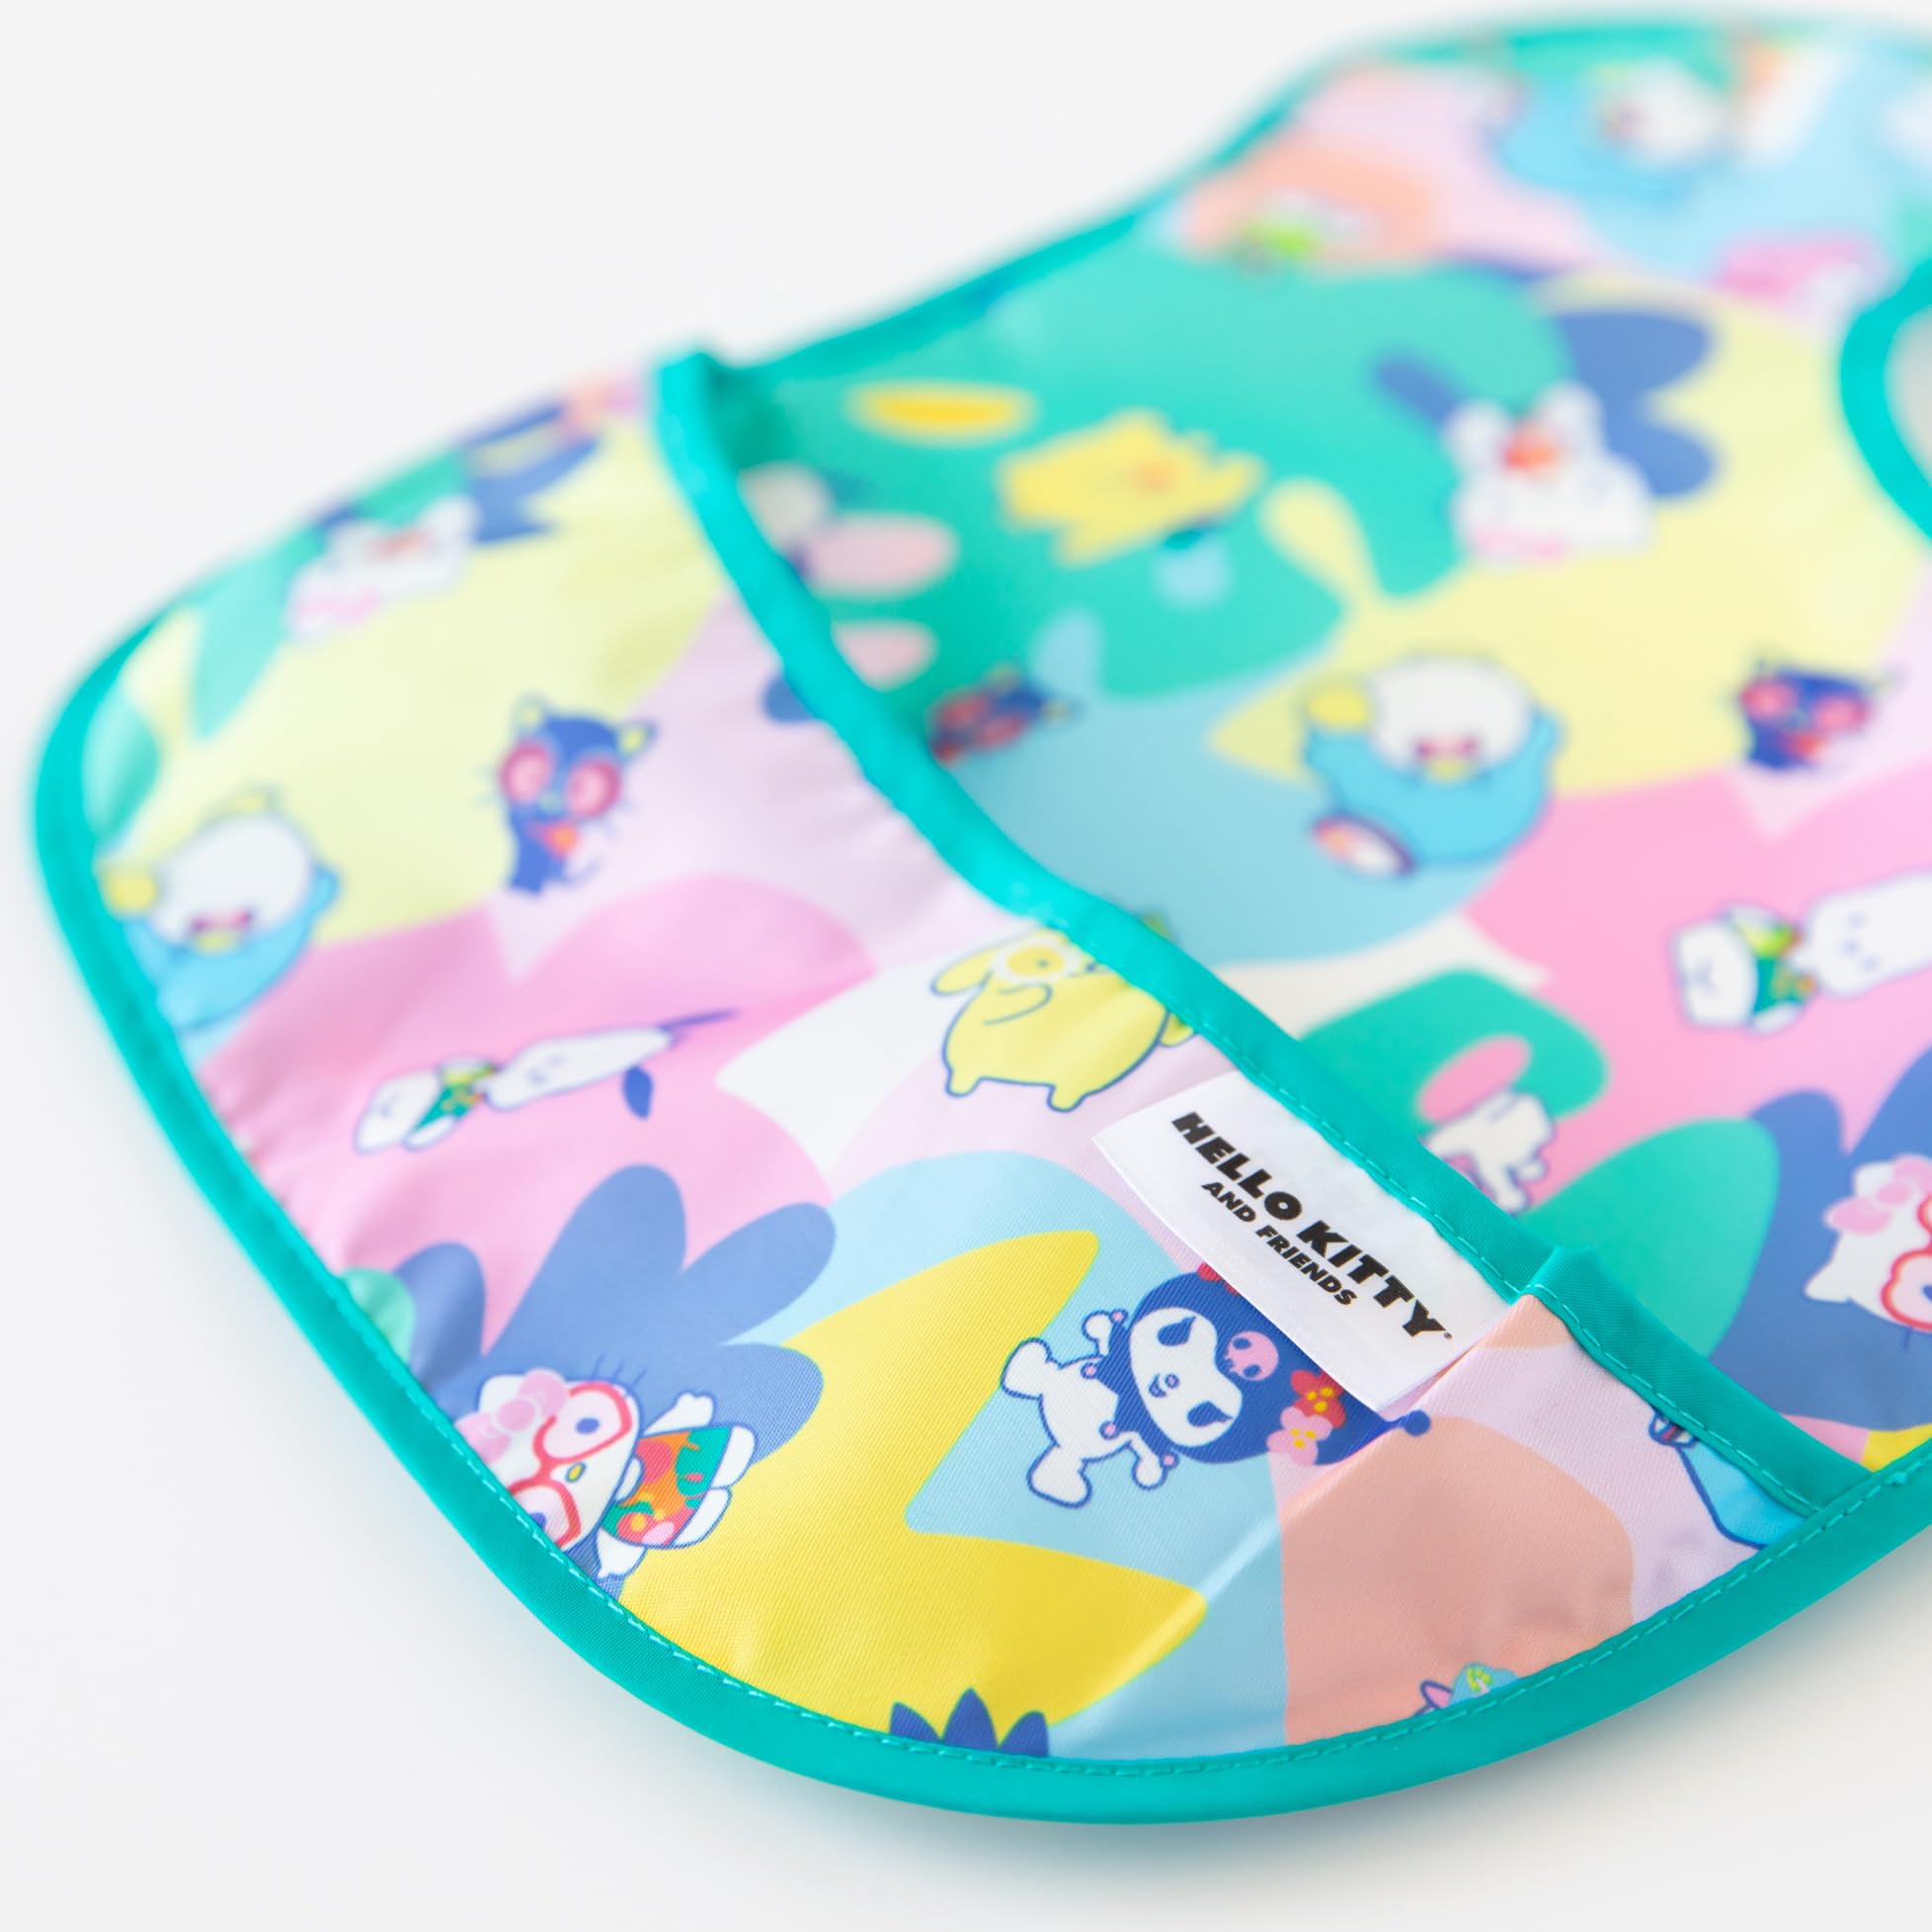 Bumkins Bibs for Girl or Boy, SuperBib Baby and Toddler for 6-24 Months, Essential Must Have for Eating, Feeding, Baby Led Weaning, Mess Saving Catch Food, Fabric